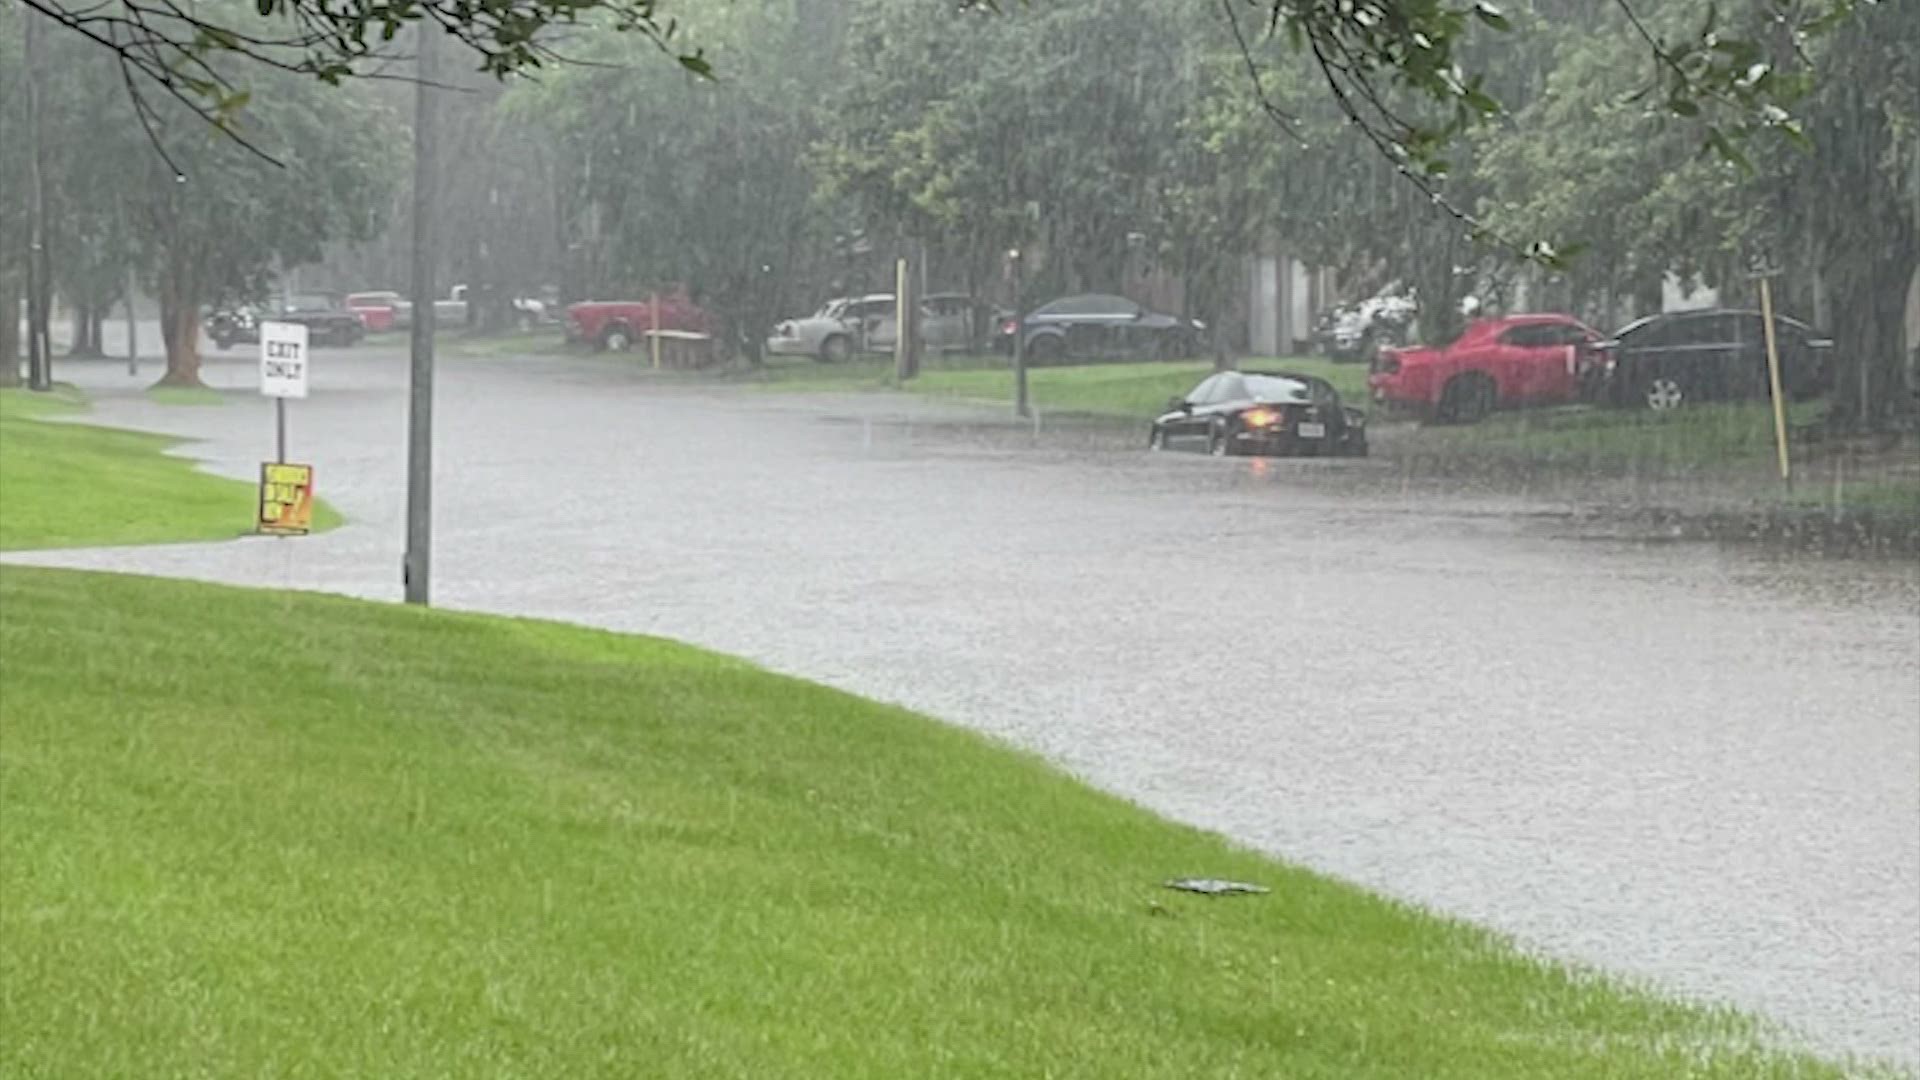 Authorities said the woman was trapped inside her vehicle in high water in the Atascocita area.